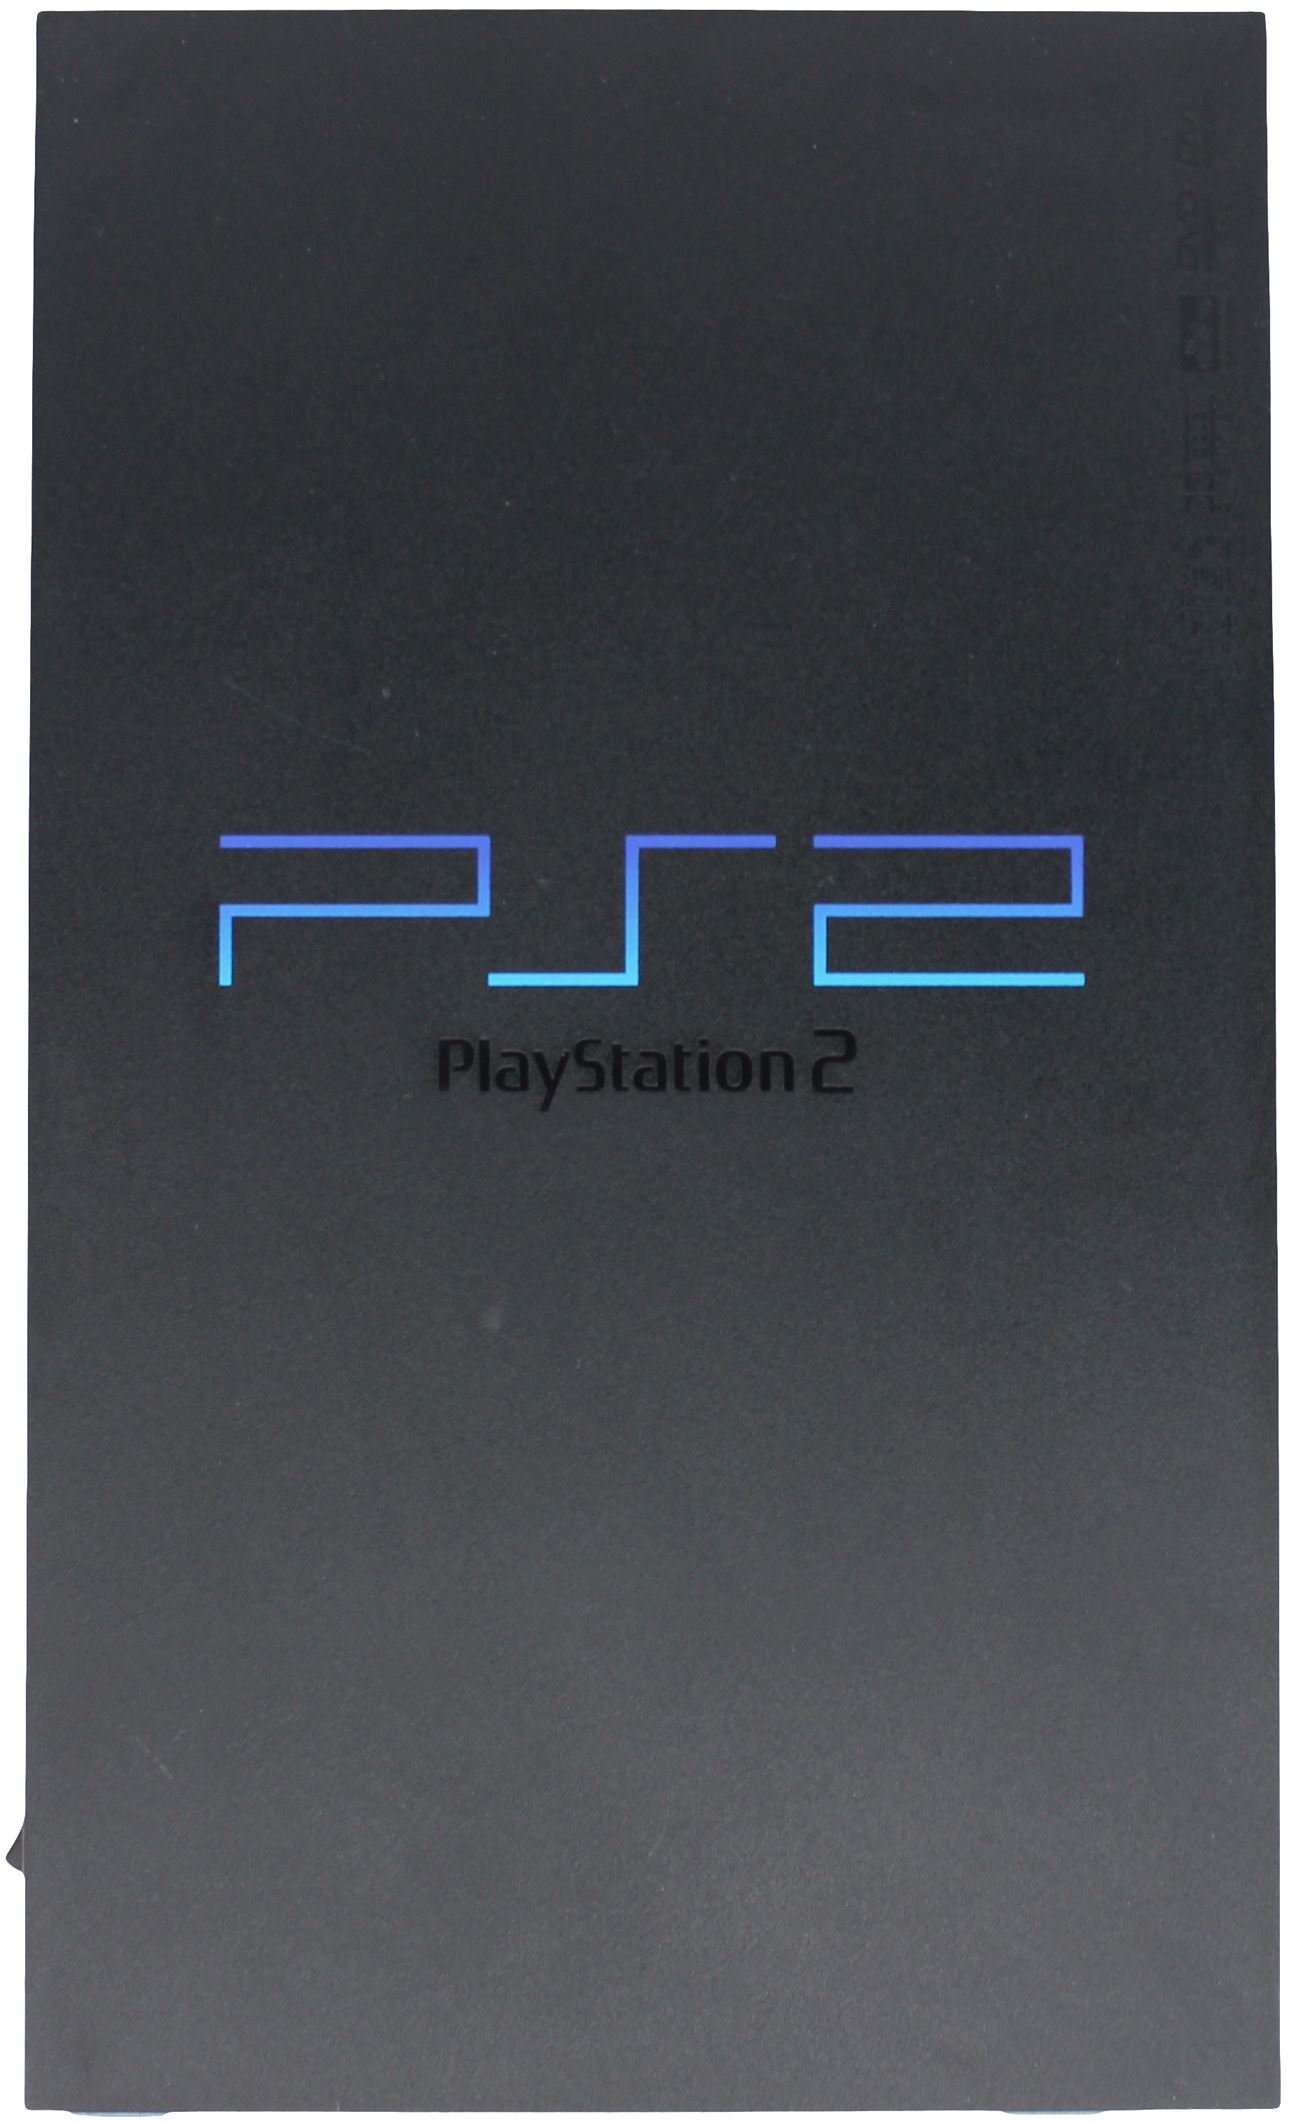 Sony PlayStation 2 (PS2) Dual-Player Bundle